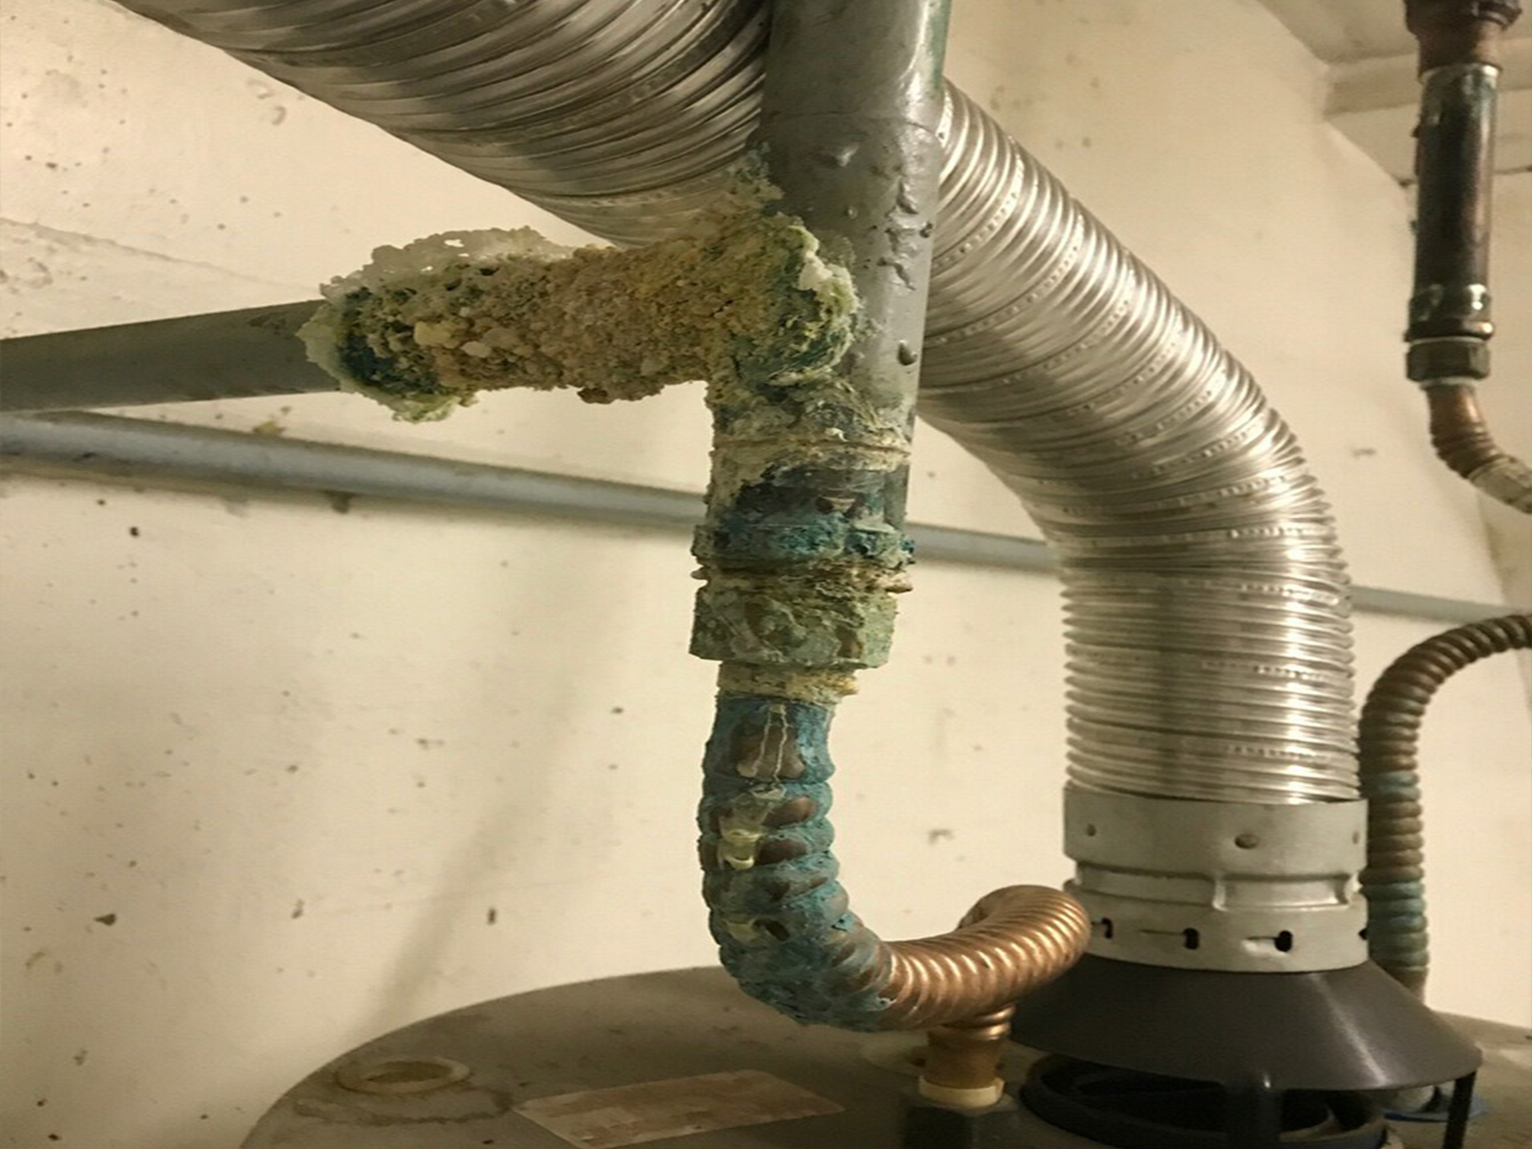 https://nolascoplumbing.com/wp-content/uploads/2022/03/These-leaks-in-pipes.jpg